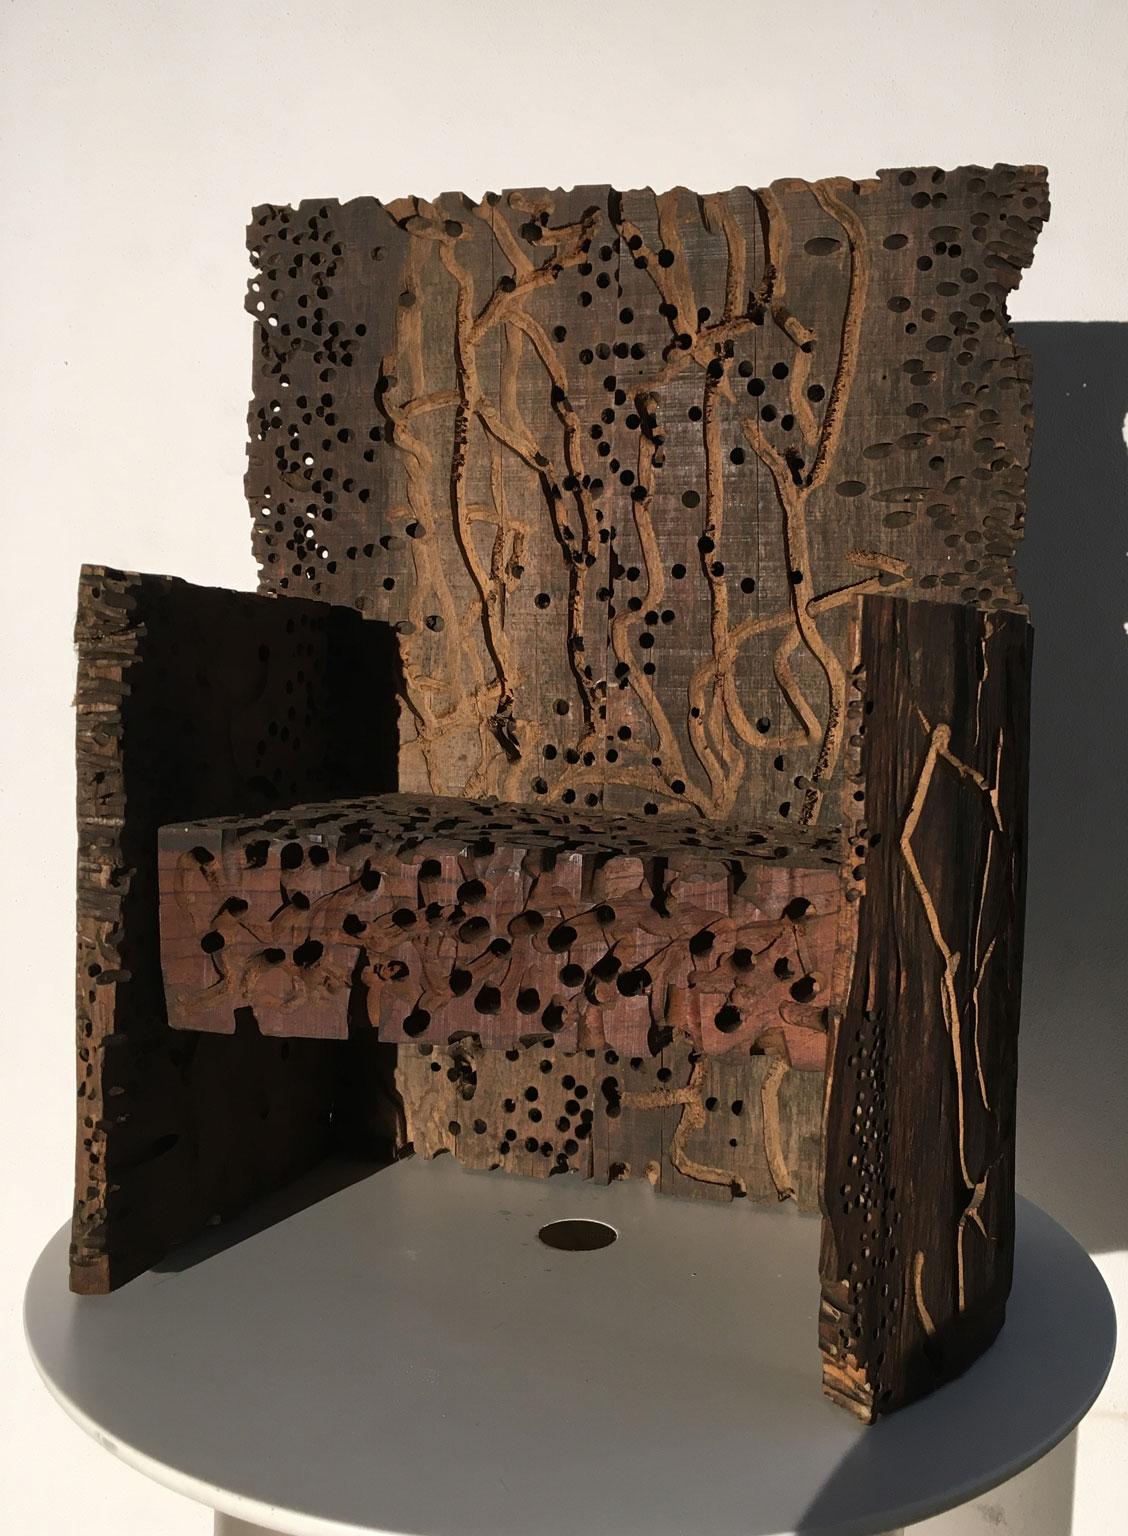 1985 Italy Wooden Abstract Sculpture by Urano Palma Grande Trono Big Throne For Sale 4